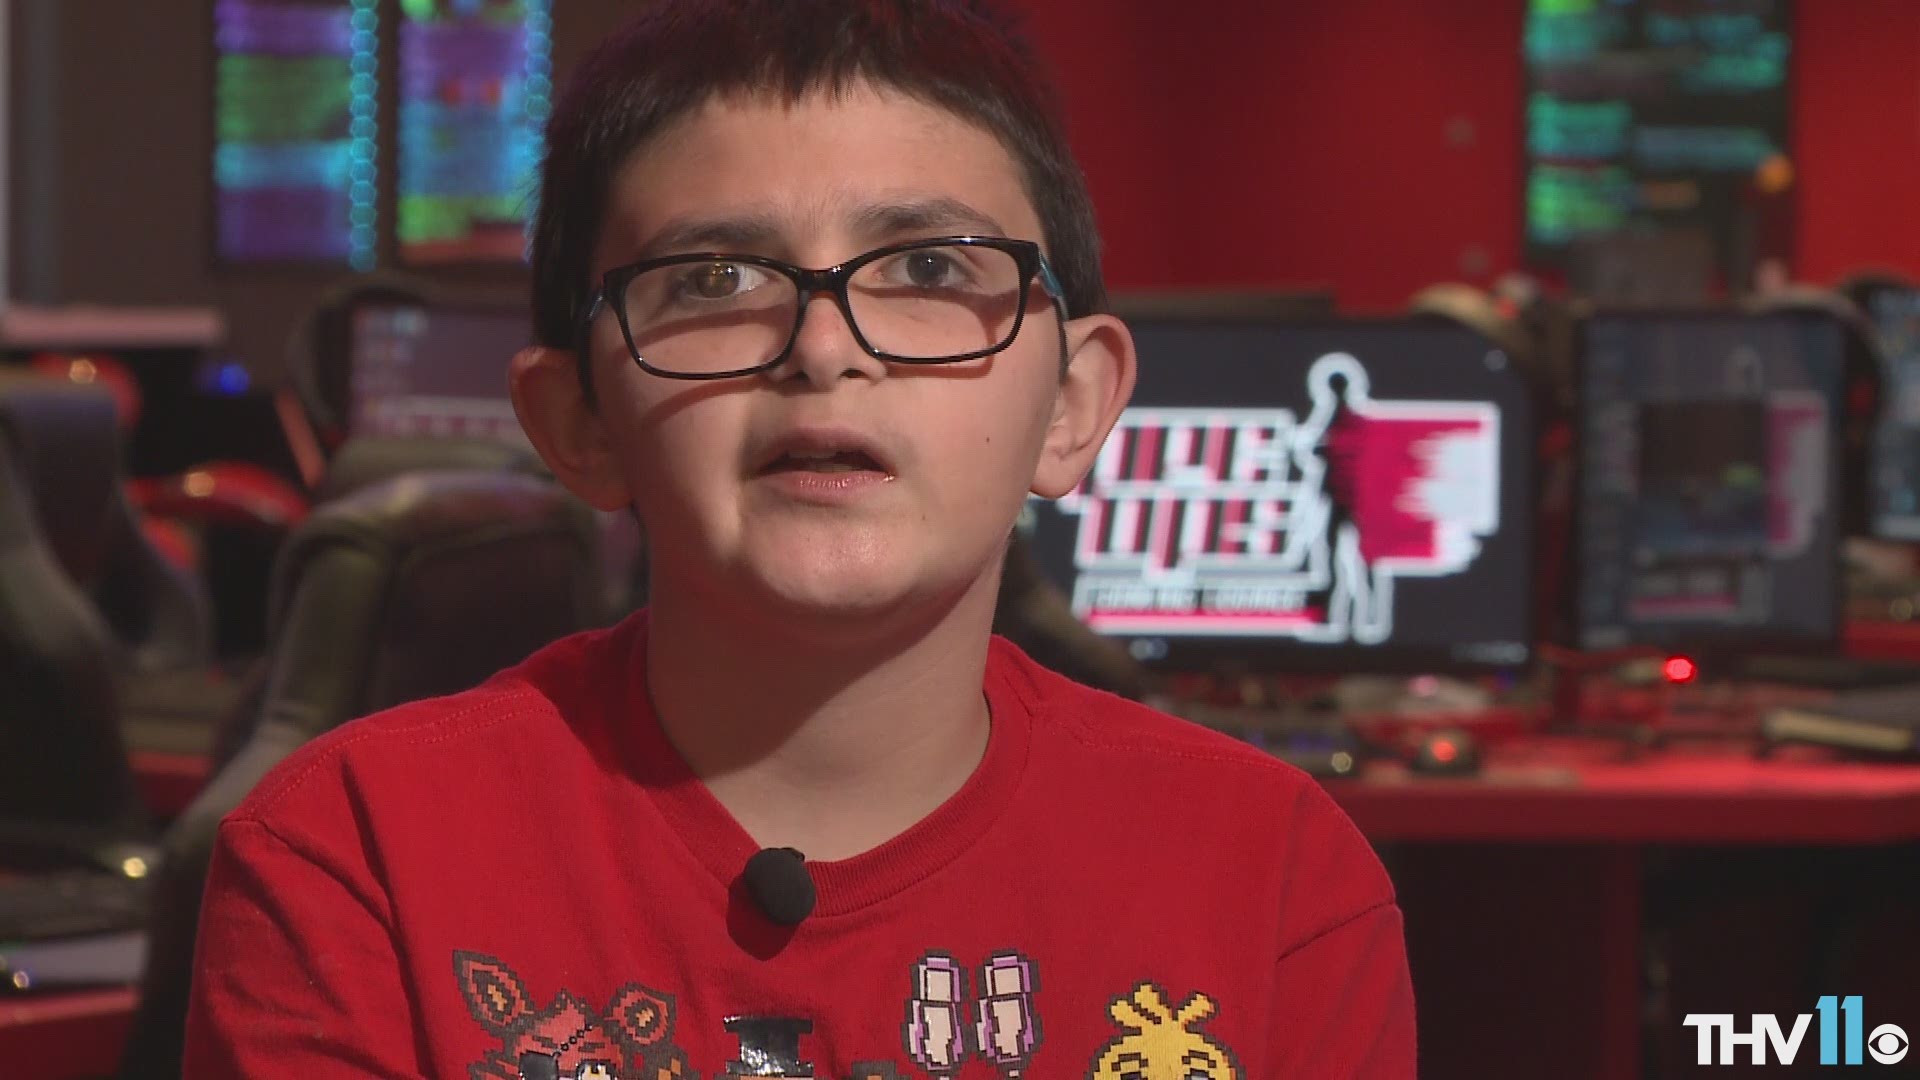 We're telling you about a young boy who loves videos games and science. But one thing he hasn't mastered yet is finding his forever family. Maybe you can help?